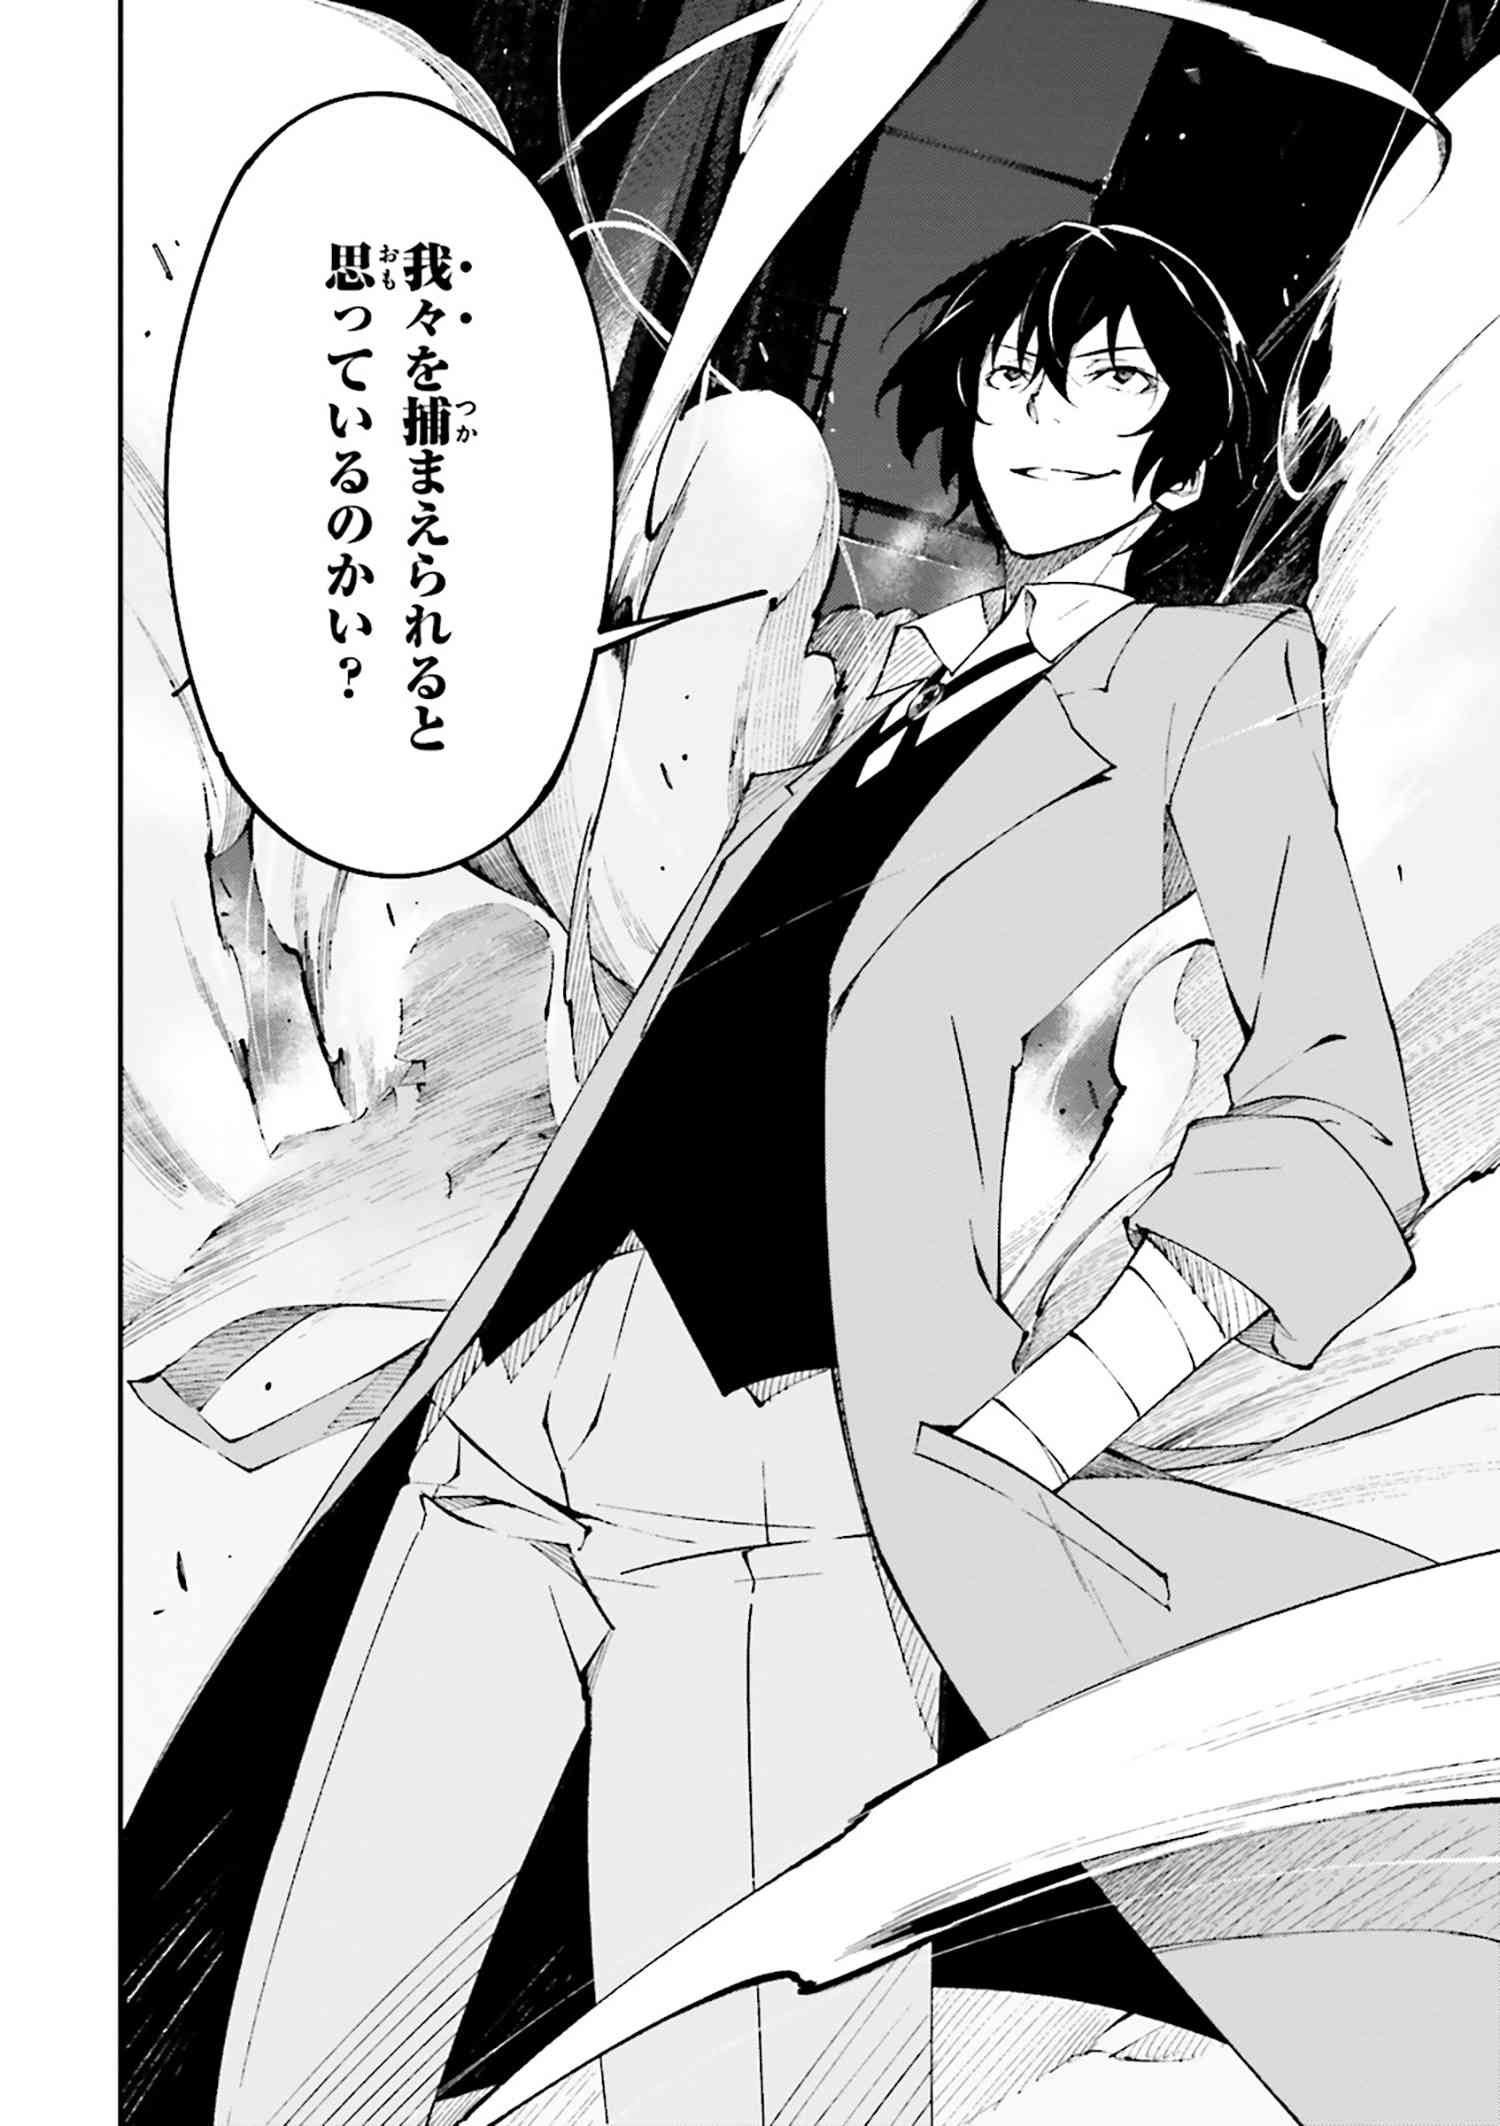 Bungou Stray Dogs: Dead Apple - Chapter 1-2 - Page 25